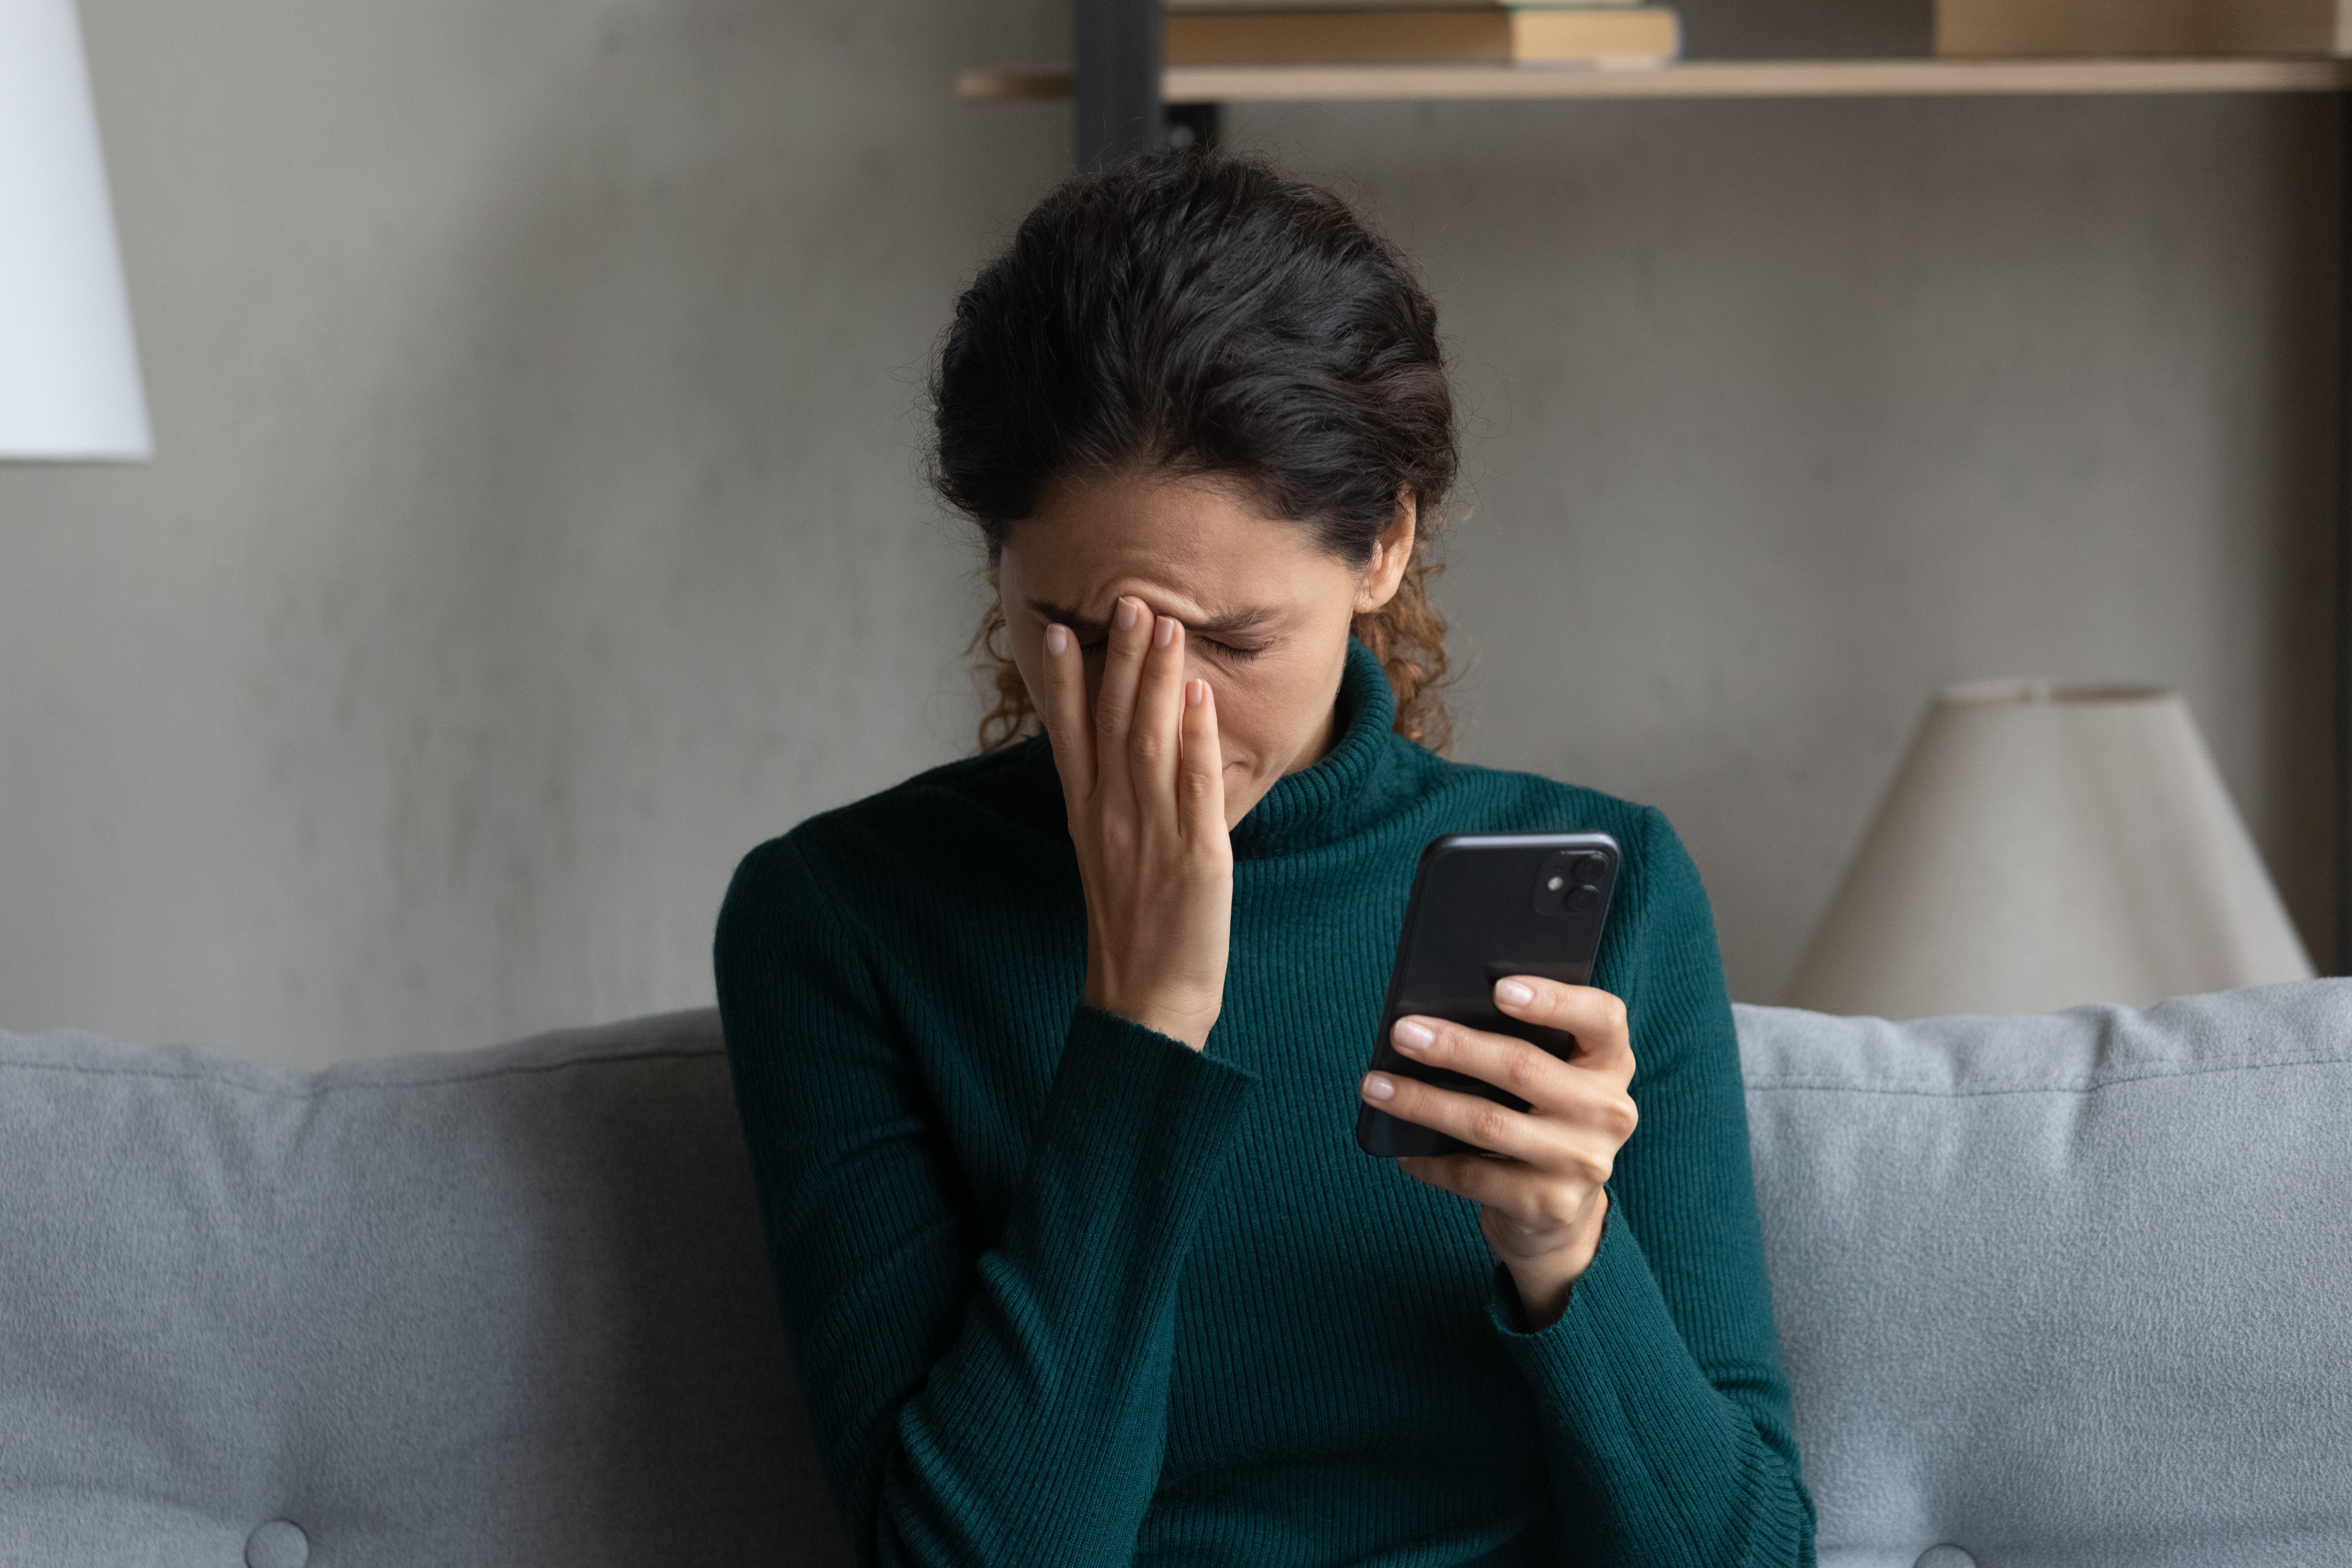 A distraught woman holding her phone | Source: Shutterstock